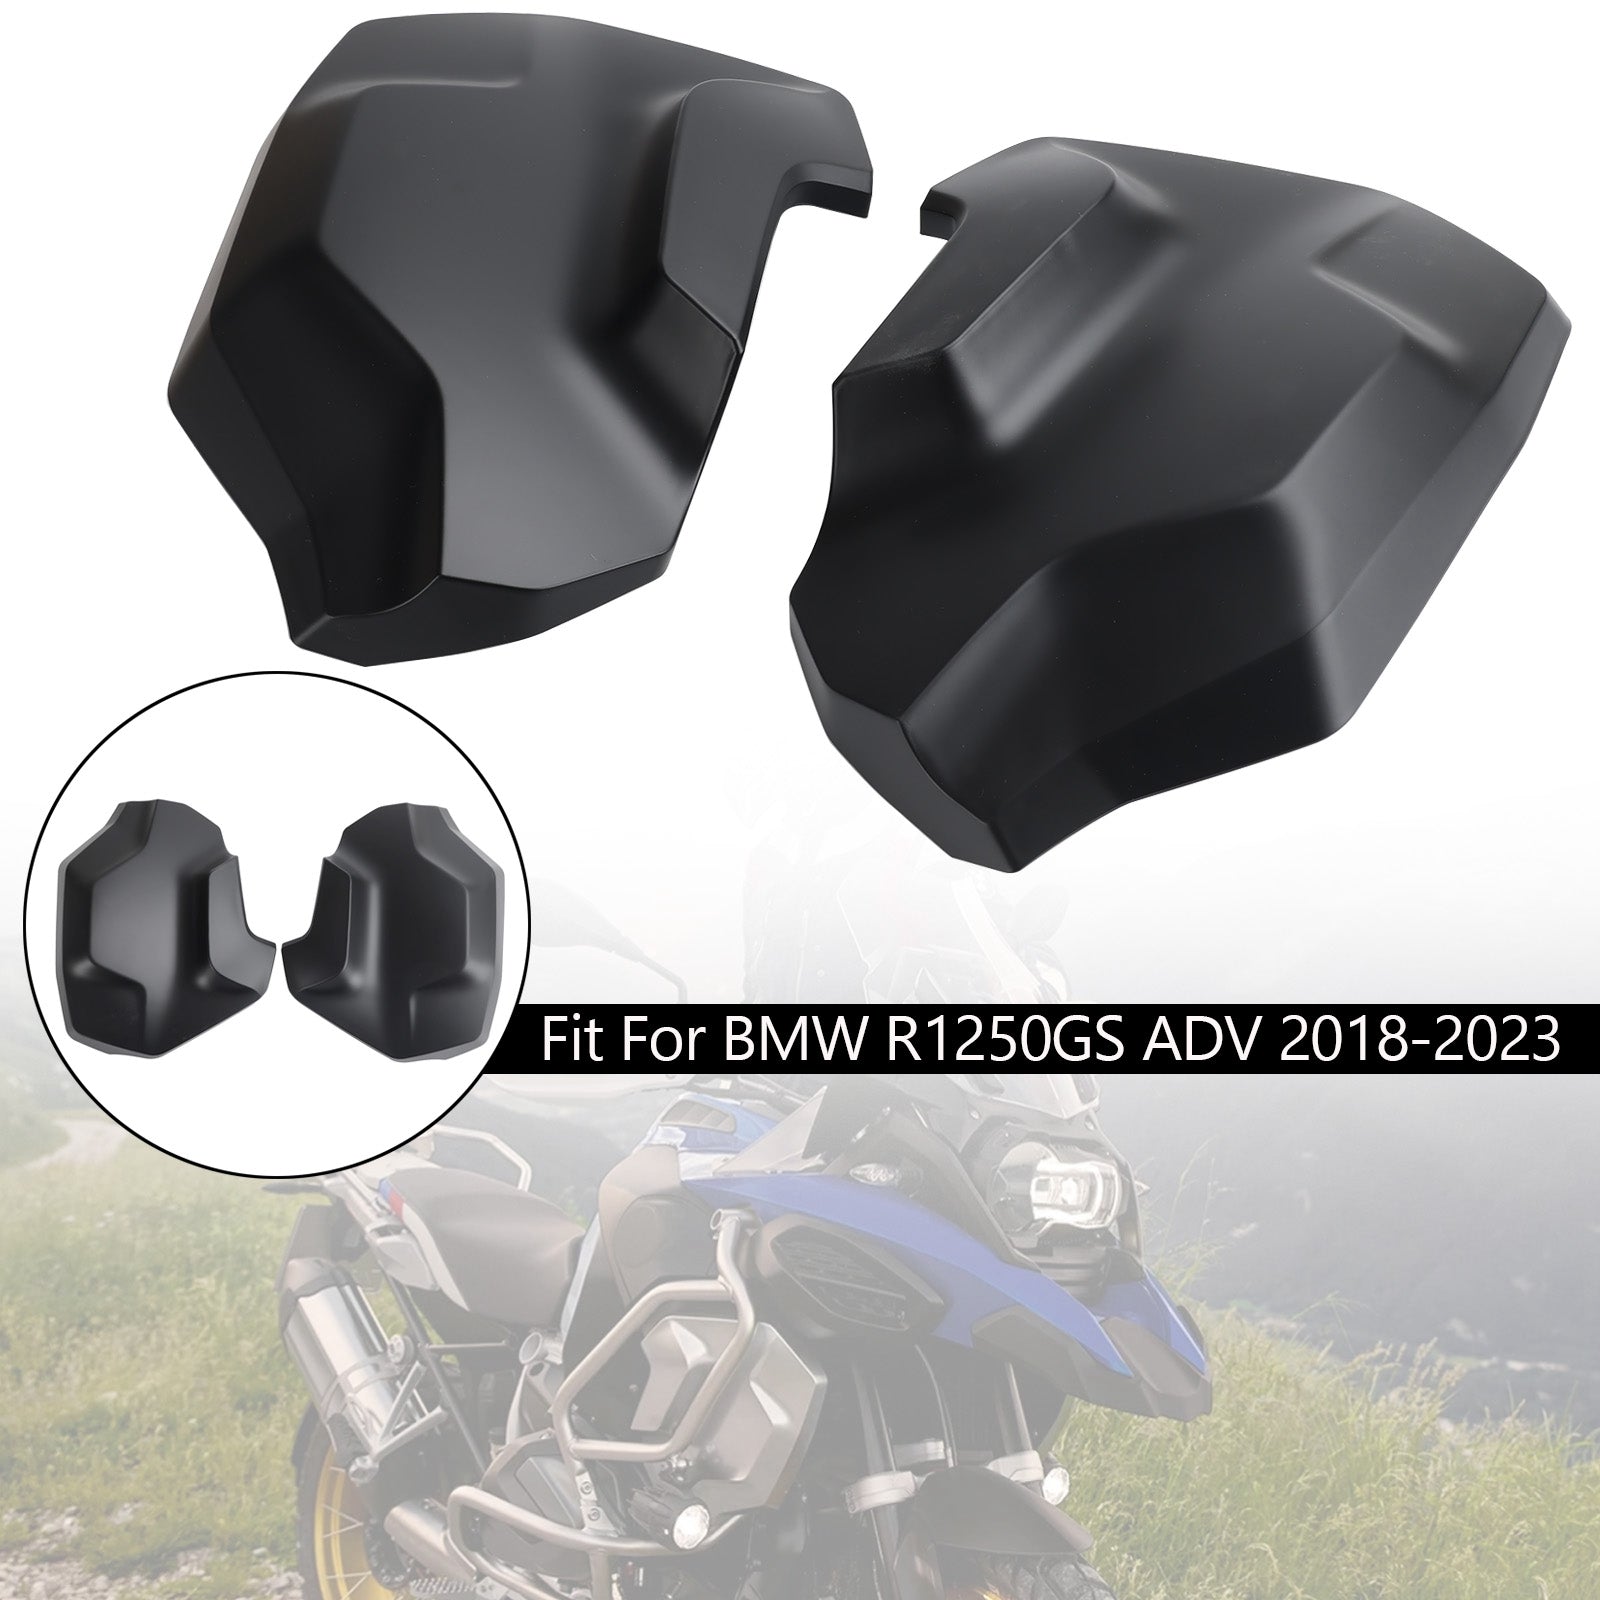 2018-2023 BMW R1250GS ADV Side Frame Fairing Cowl Guards Radiator Cover